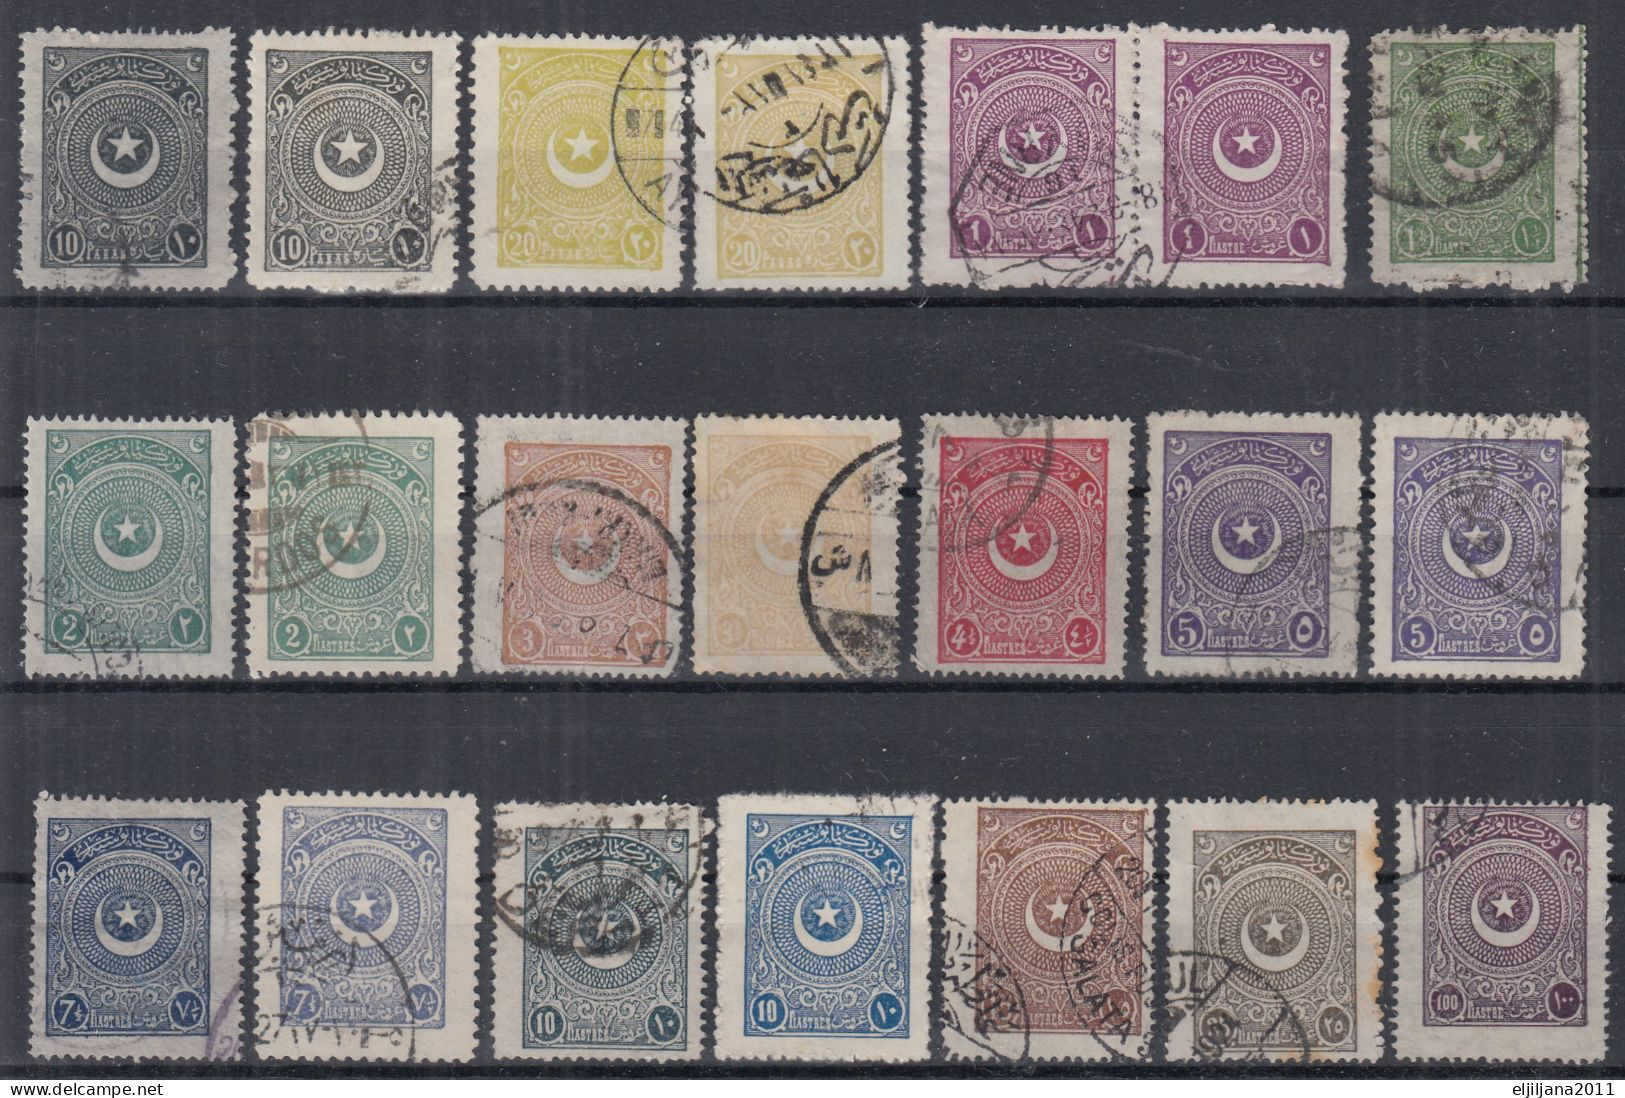 Action !! SALE !! 50 % Turkey / Türkei 1923 - 1925 ⁕ Star And Crescent In A Circle ⁕ 21v Used / Shades - Different Perf. - Gebraucht